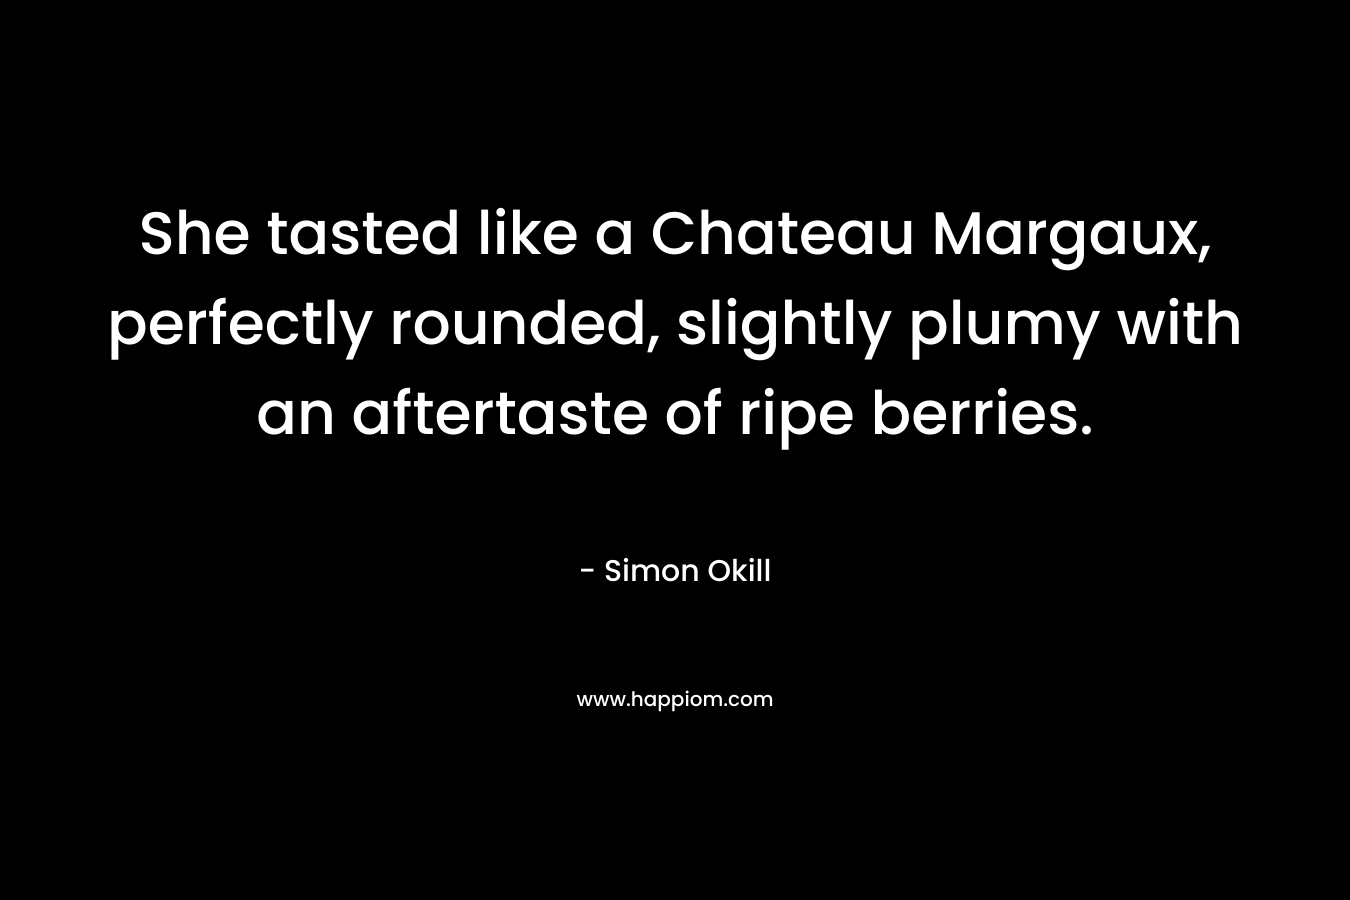 She tasted like a Chateau Margaux, perfectly rounded, slightly plumy with an aftertaste of ripe berries. – Simon Okill